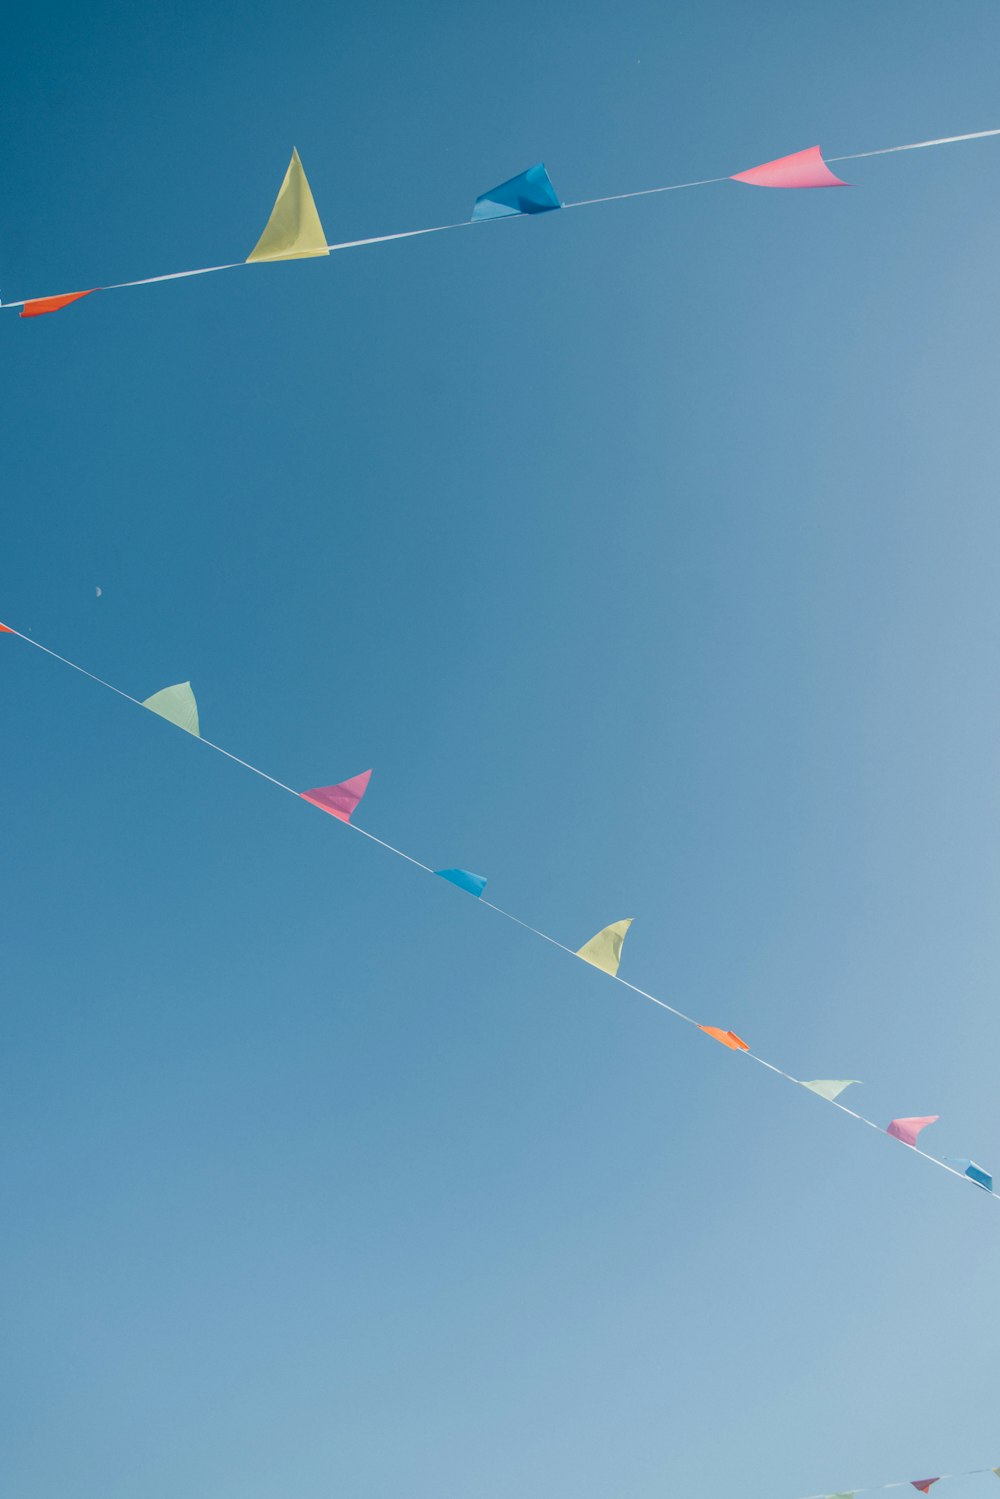 a group of kites flying in a blue sky